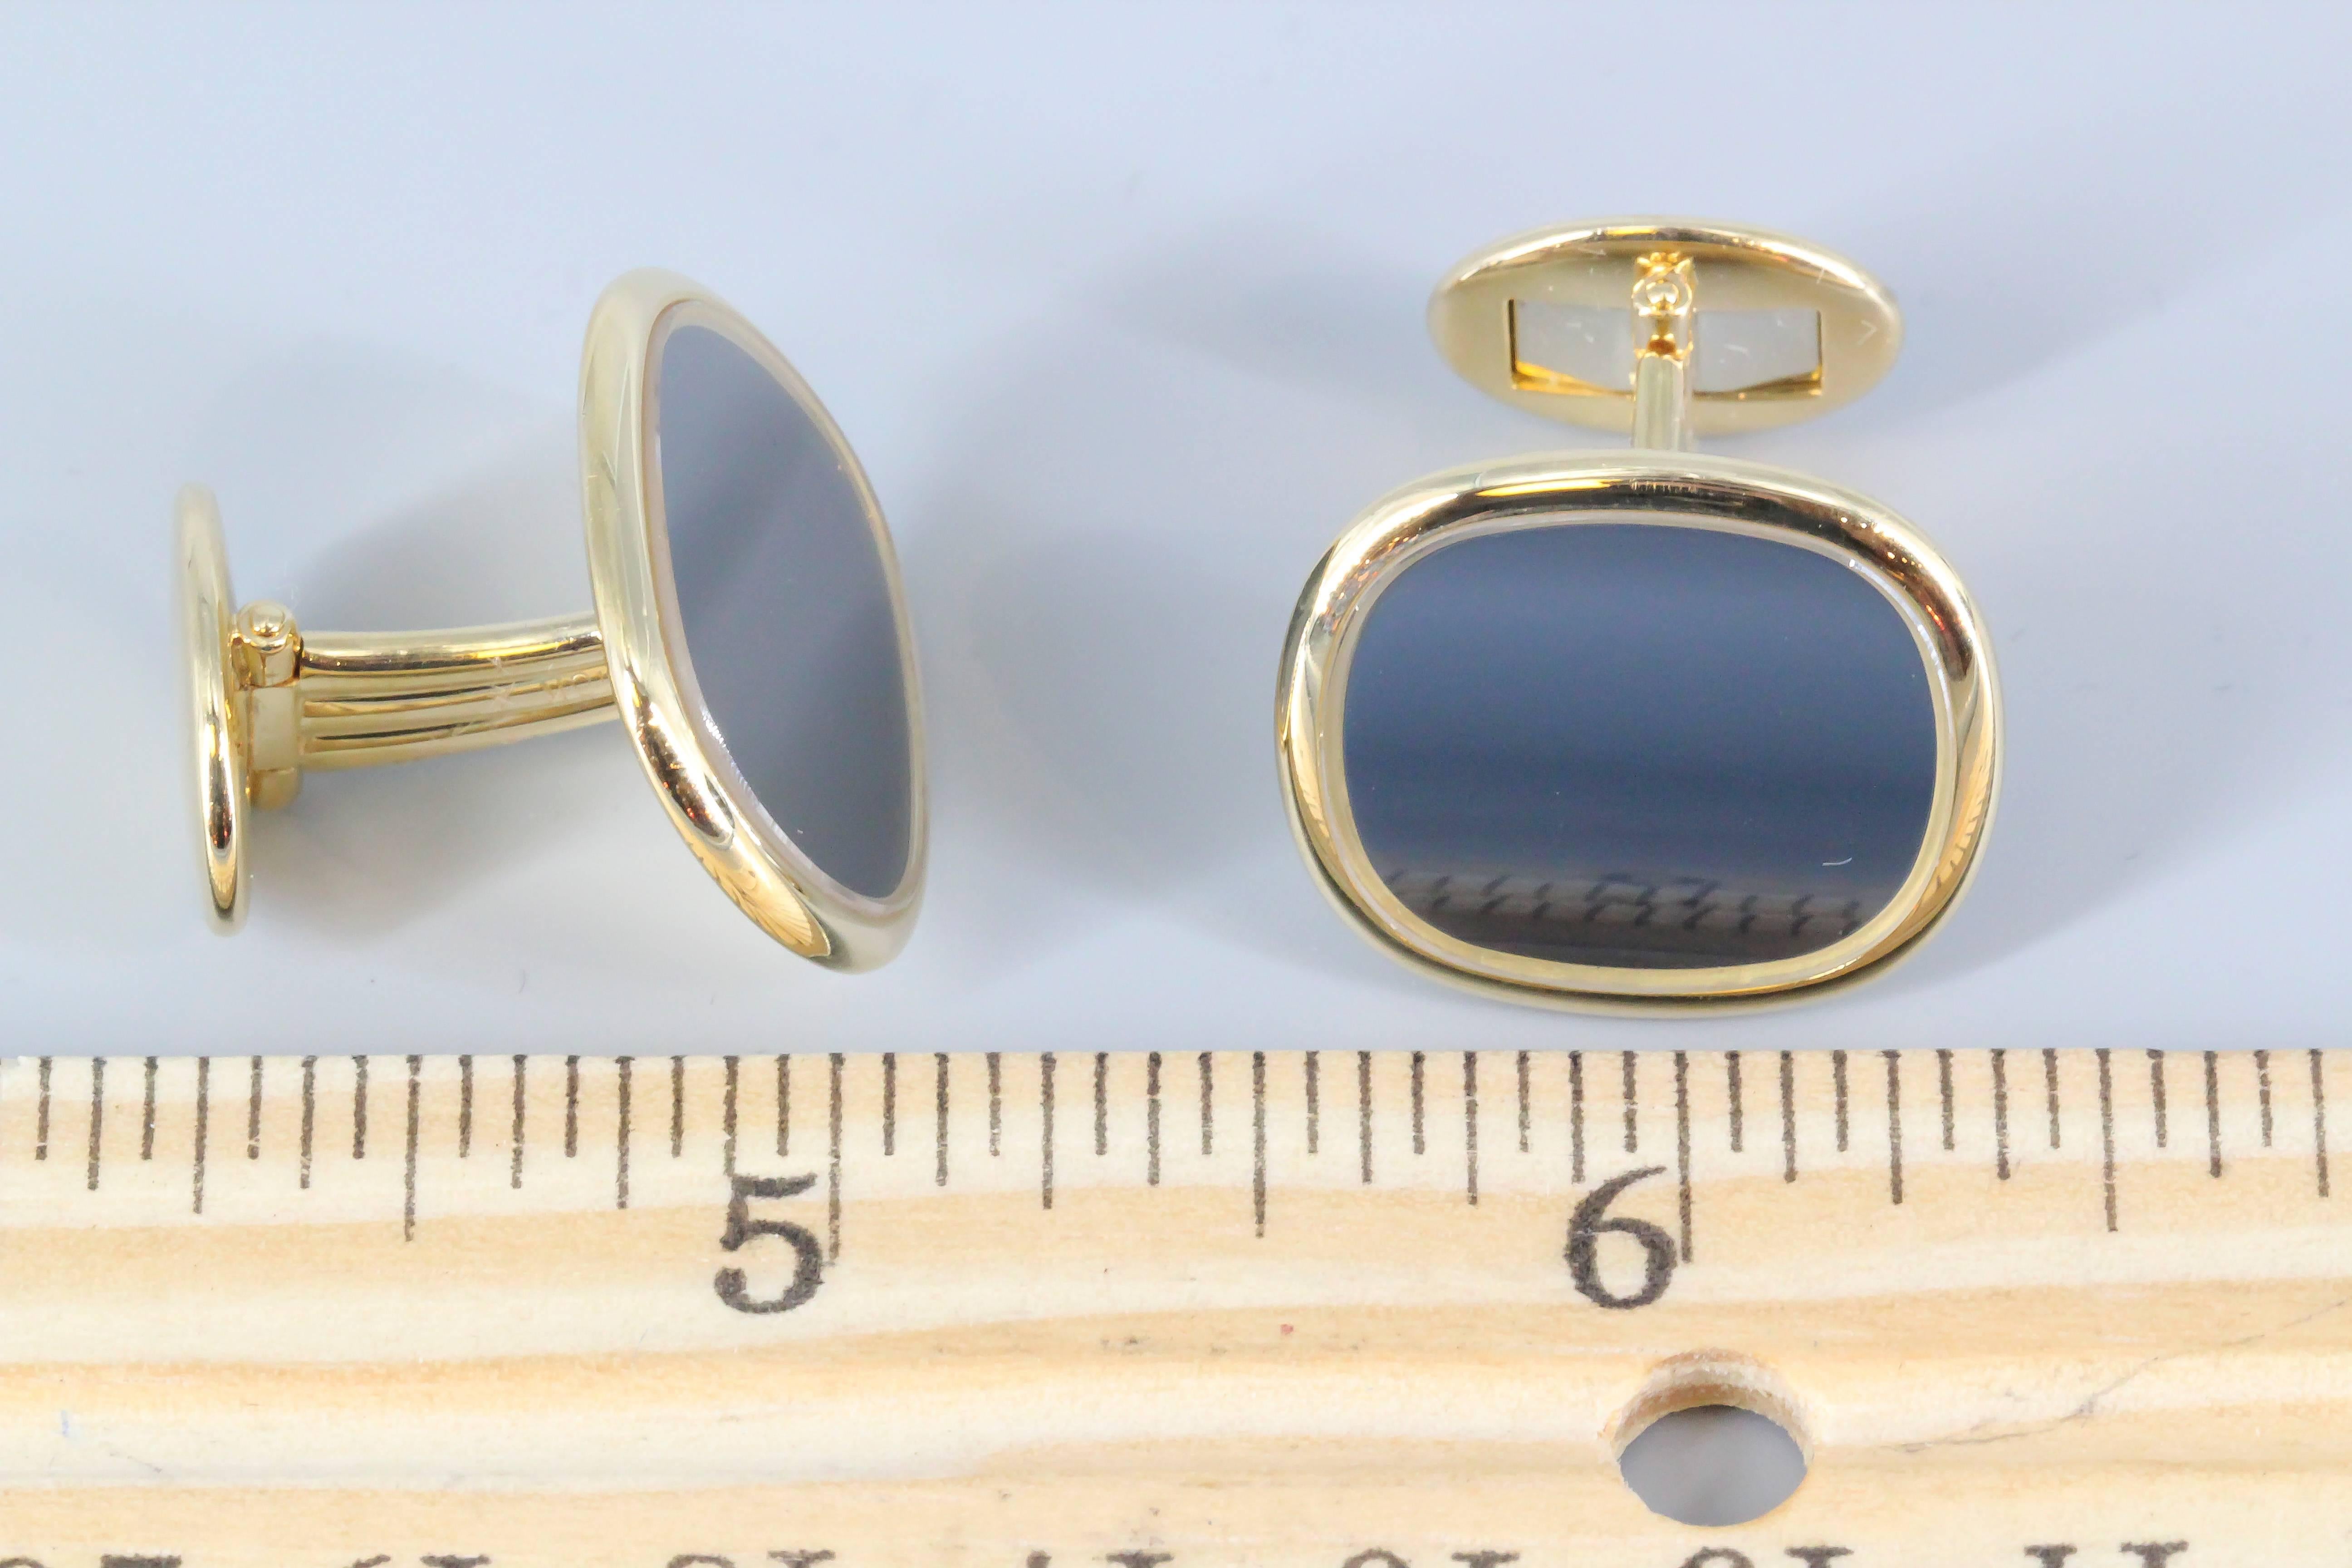 Handsome 18K yellow gold cufflinks from the Ellipse collection by Patek Philippe. These are the largest size available and feature a sharp blue sunburst face. Refined and elegant in their simplicity yet displaying great presence.

Hallmarks: Patek